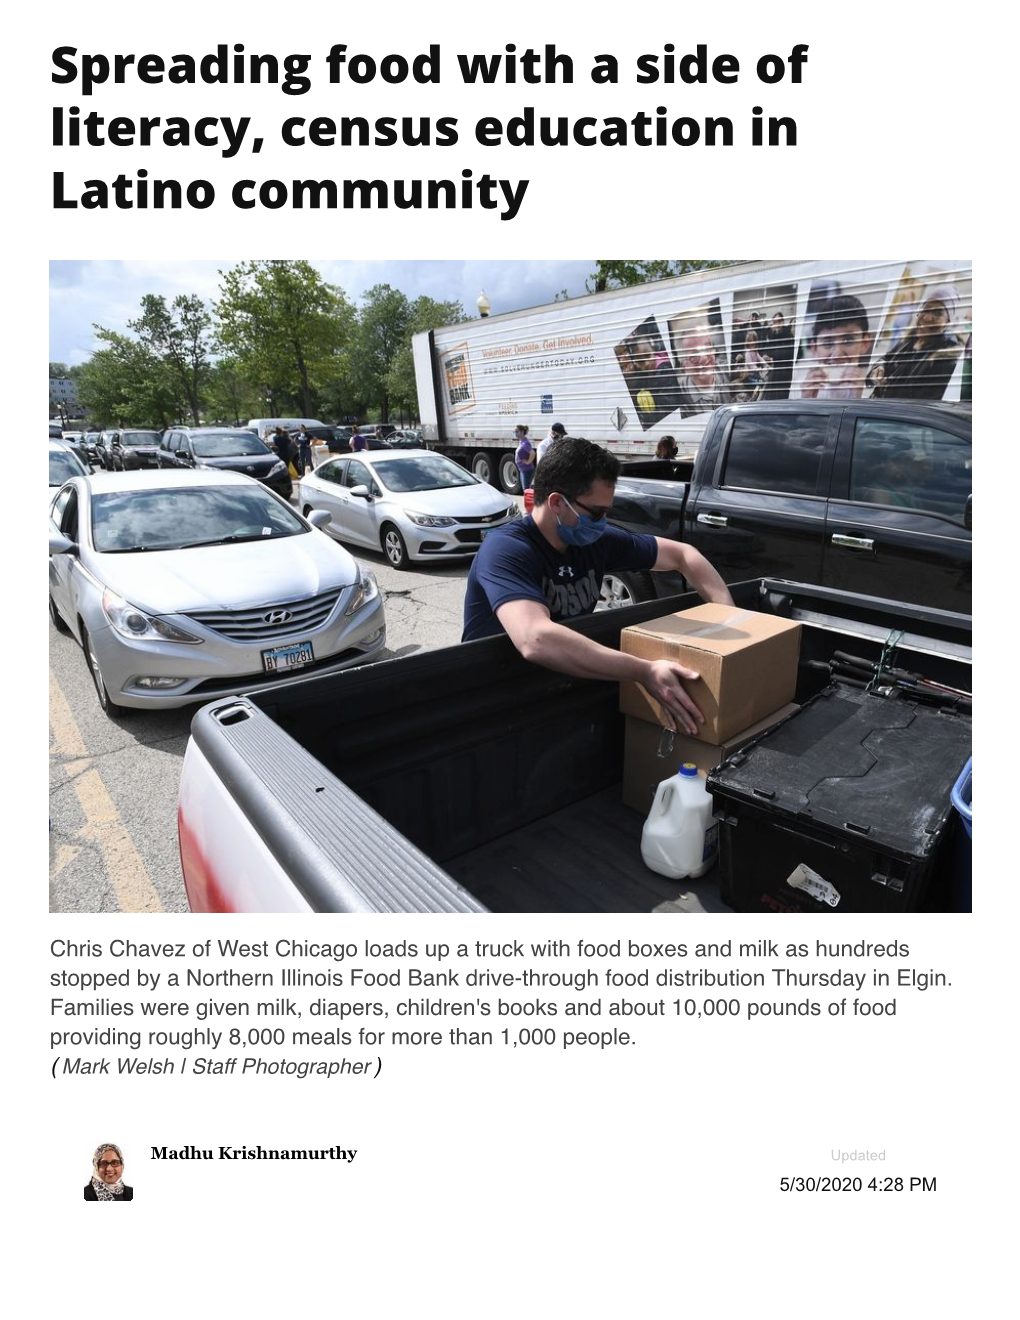 Spreading Food with a Side of Literacy, Census Education in Latino Community